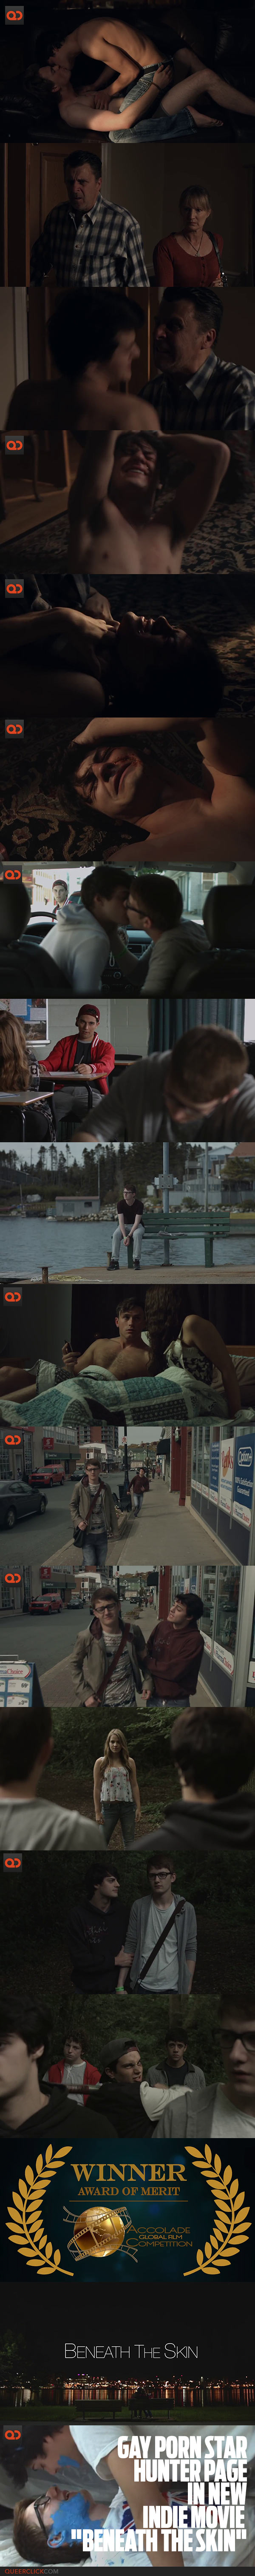 qc-hunter-page-in-new-indie-movie-beneath-the-skin-collage03